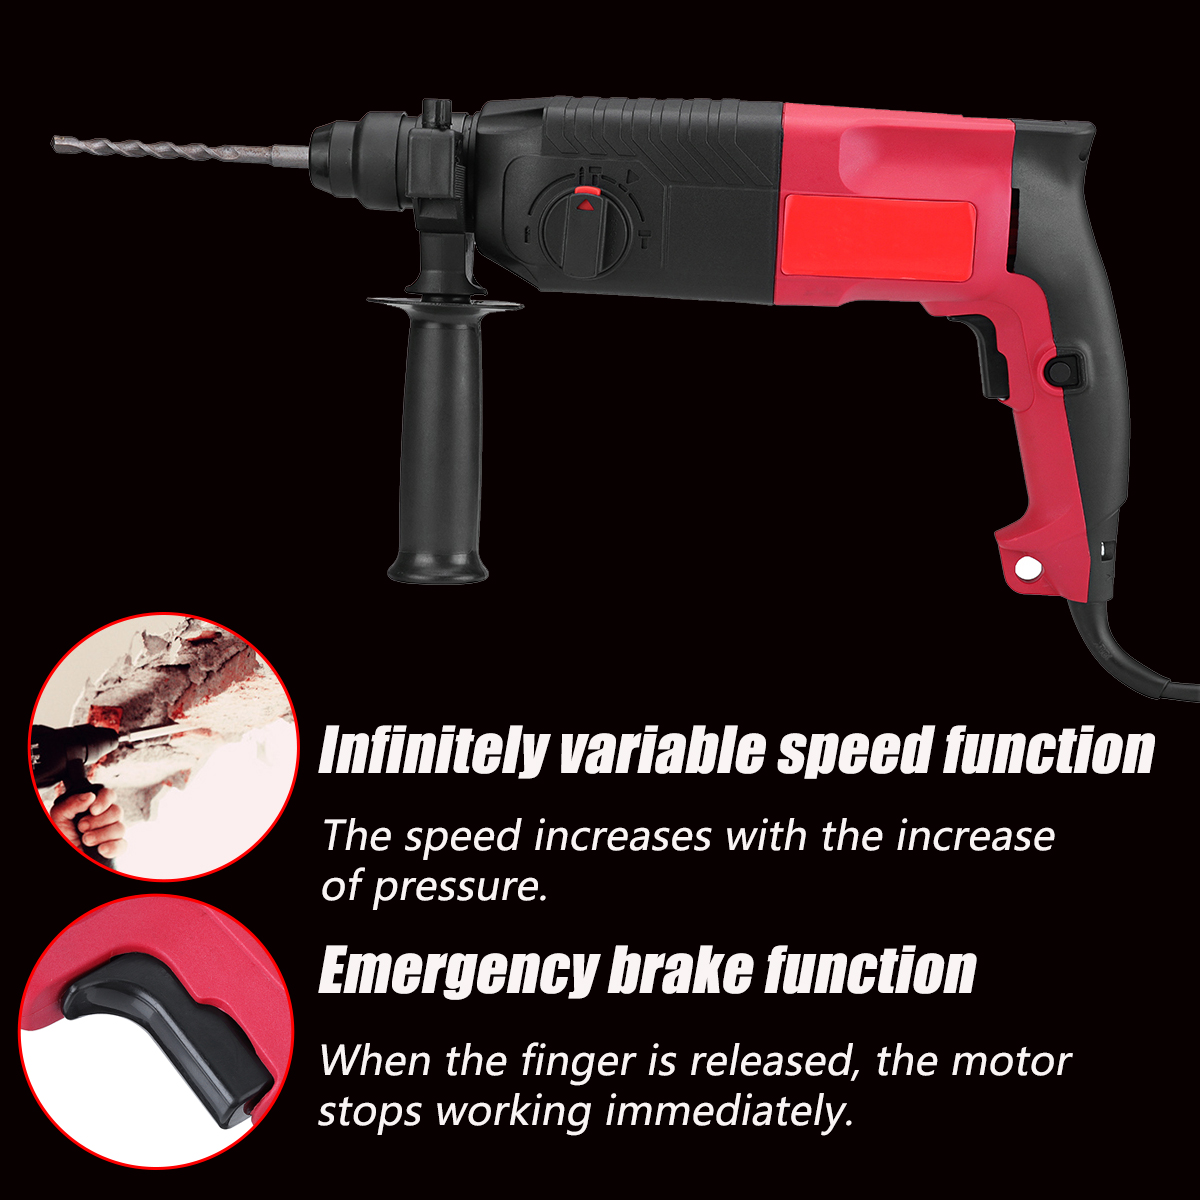 3-In1-620W-24mm-Electric-Hammer-Multifunction-Electric-Drill-Hammer-Pick-Punch-Bit-Set-1409169-7